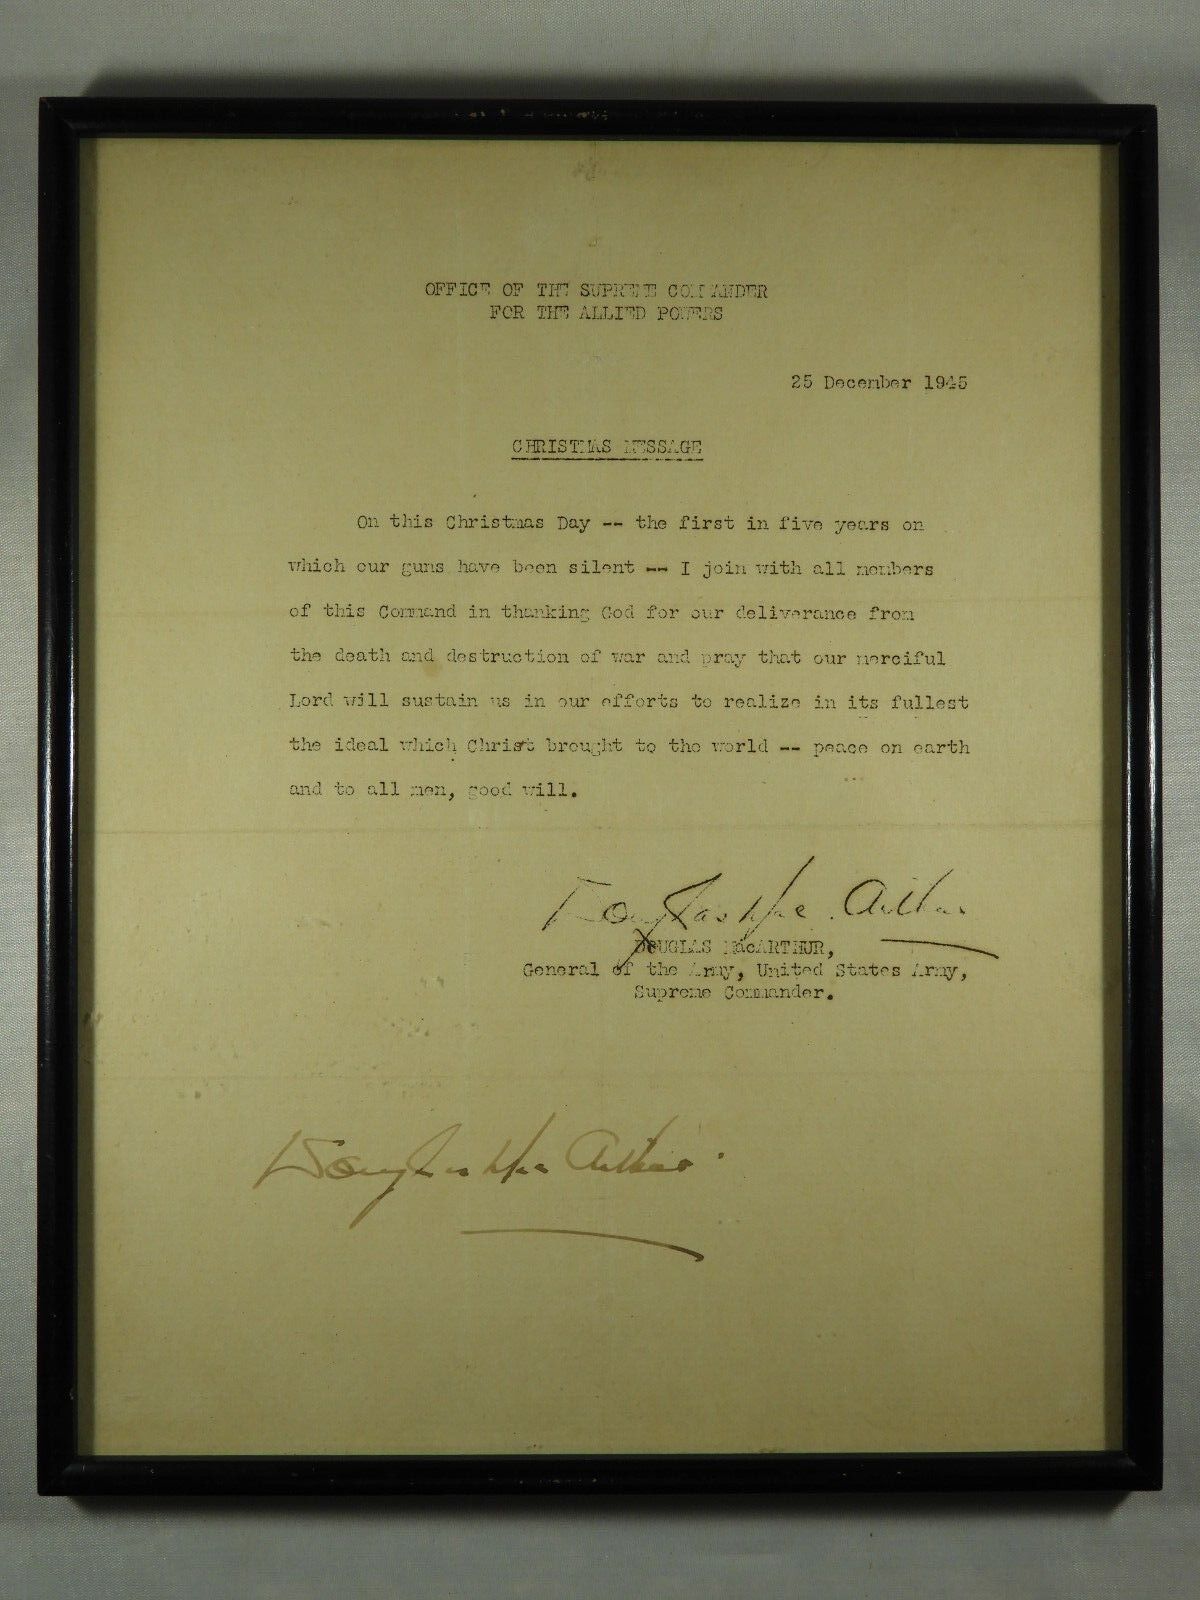 Historically Important End of World War II Message SIGNED by Douglas MacArthur